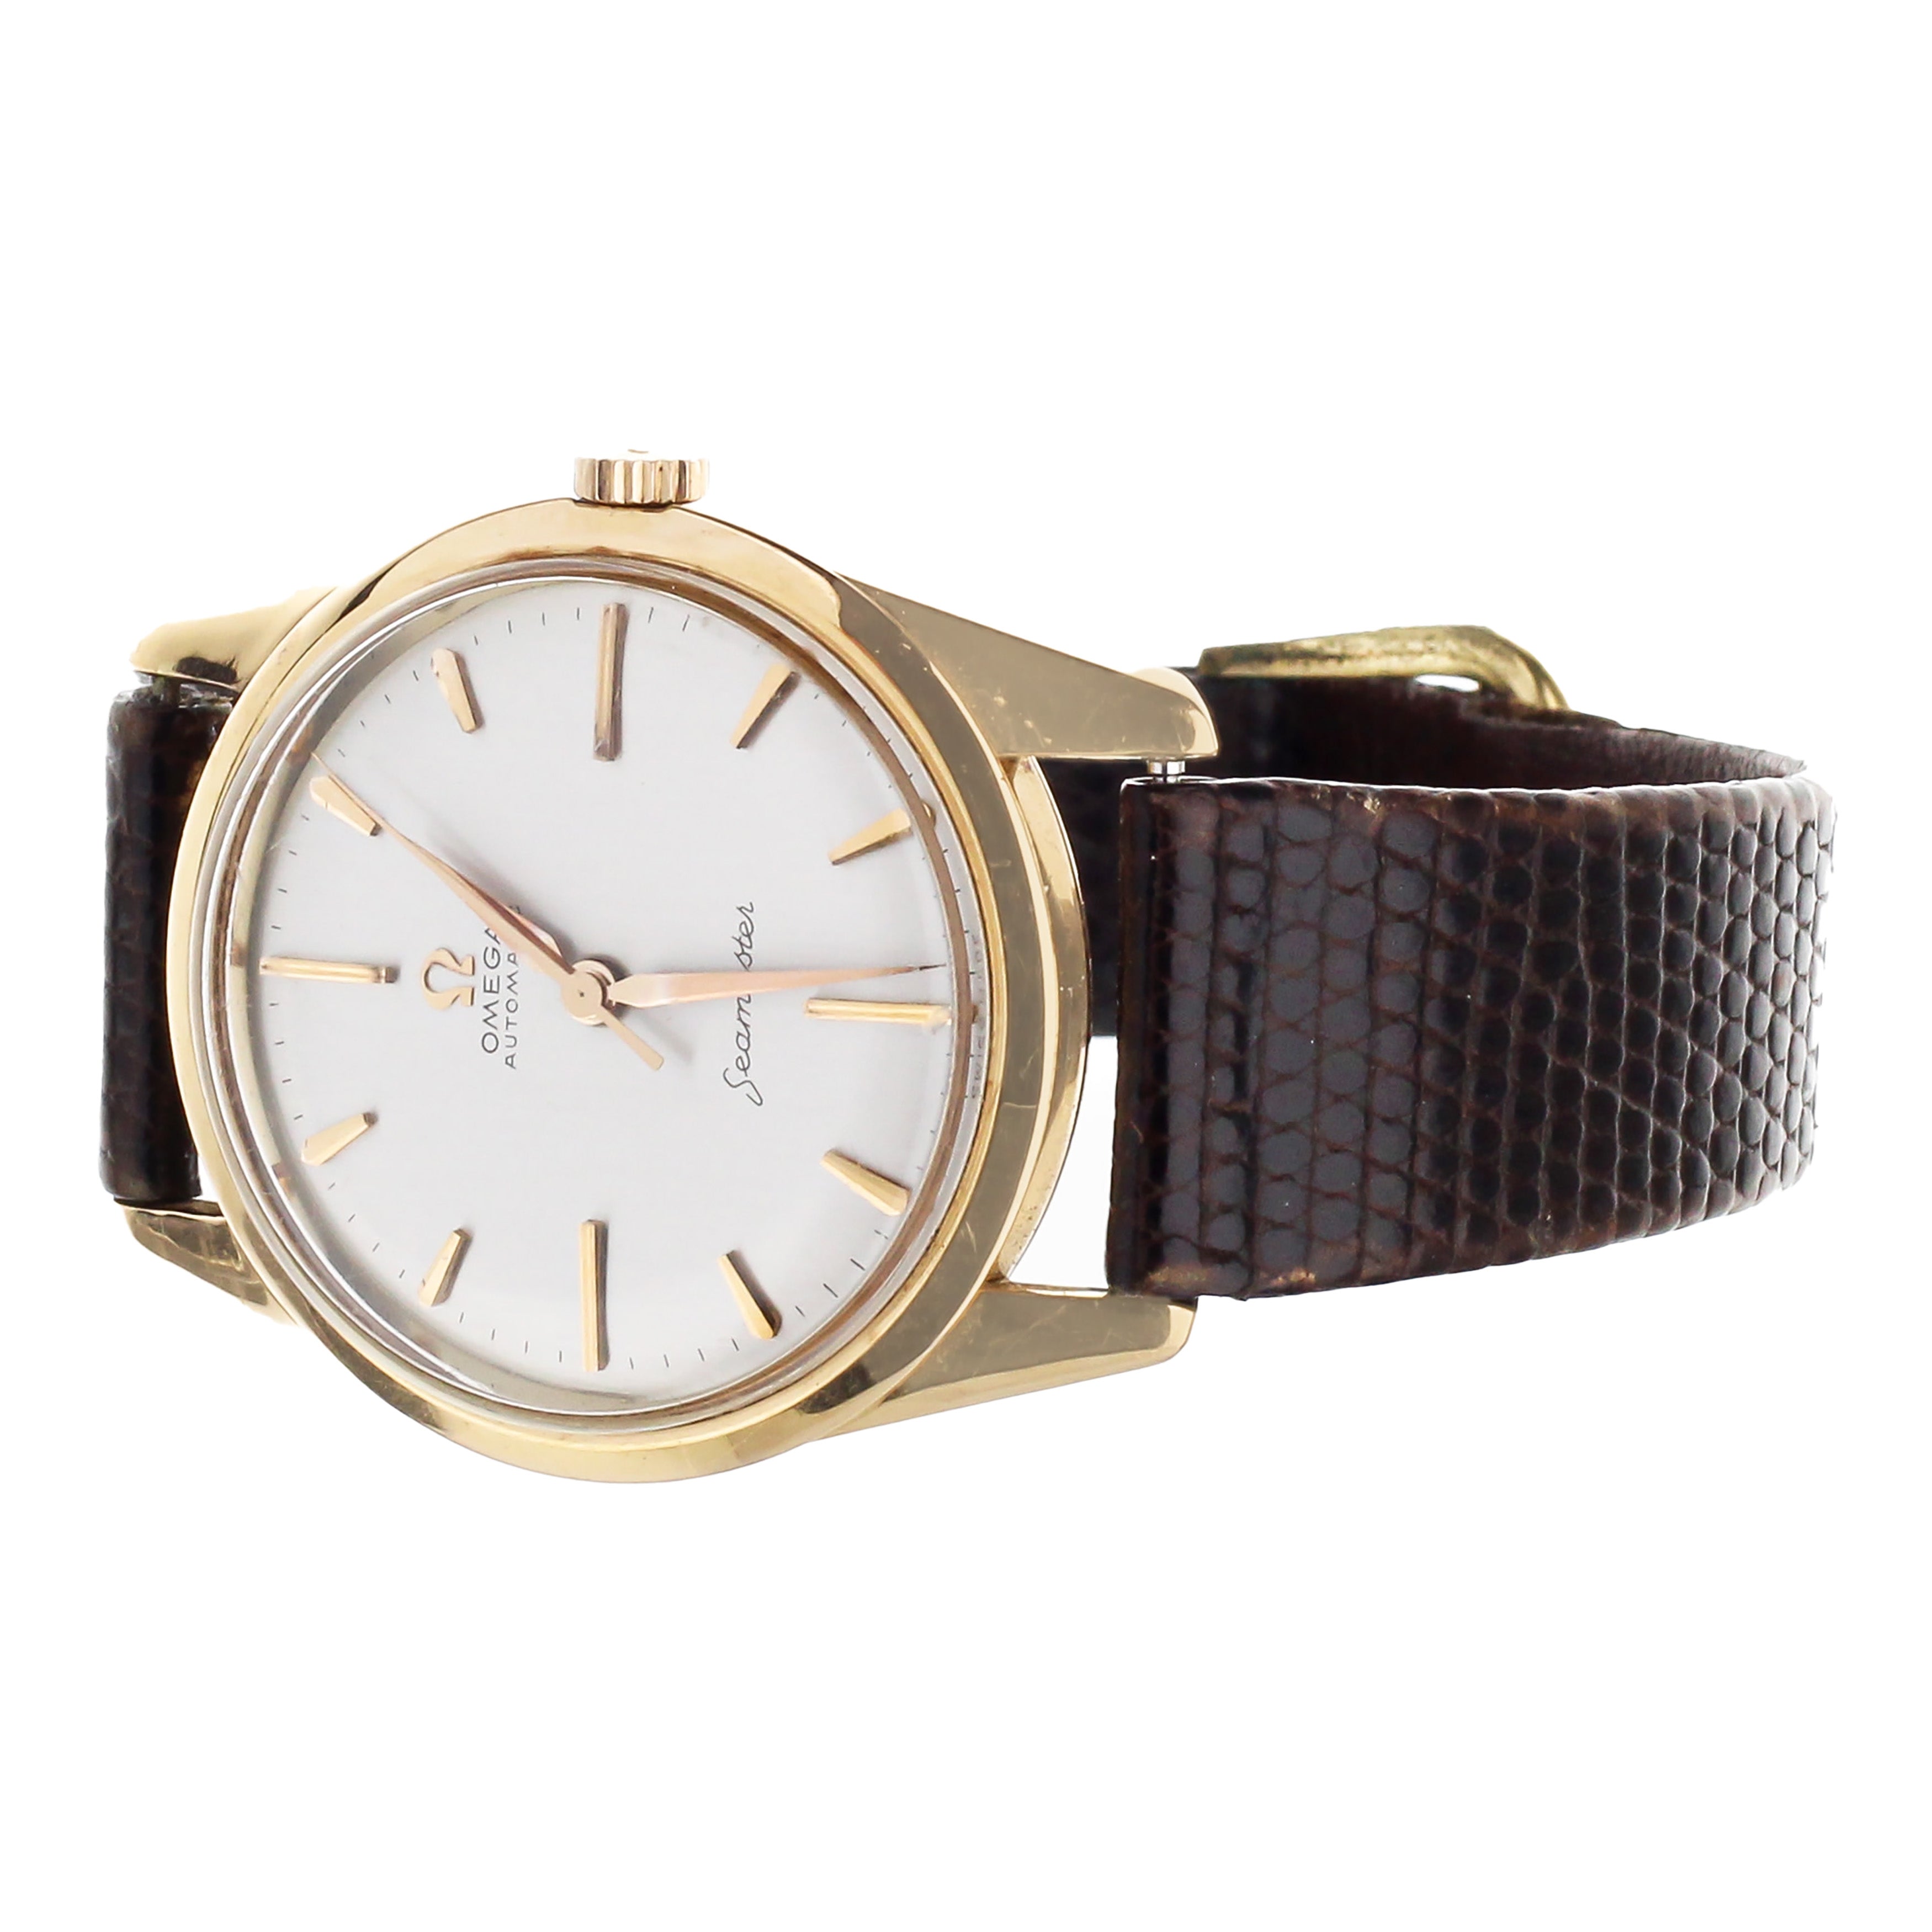 OMEGA SEAMASTER AUToMATIC 147.004 35MM YELLOW GOLD CASE LEATHER STRAP